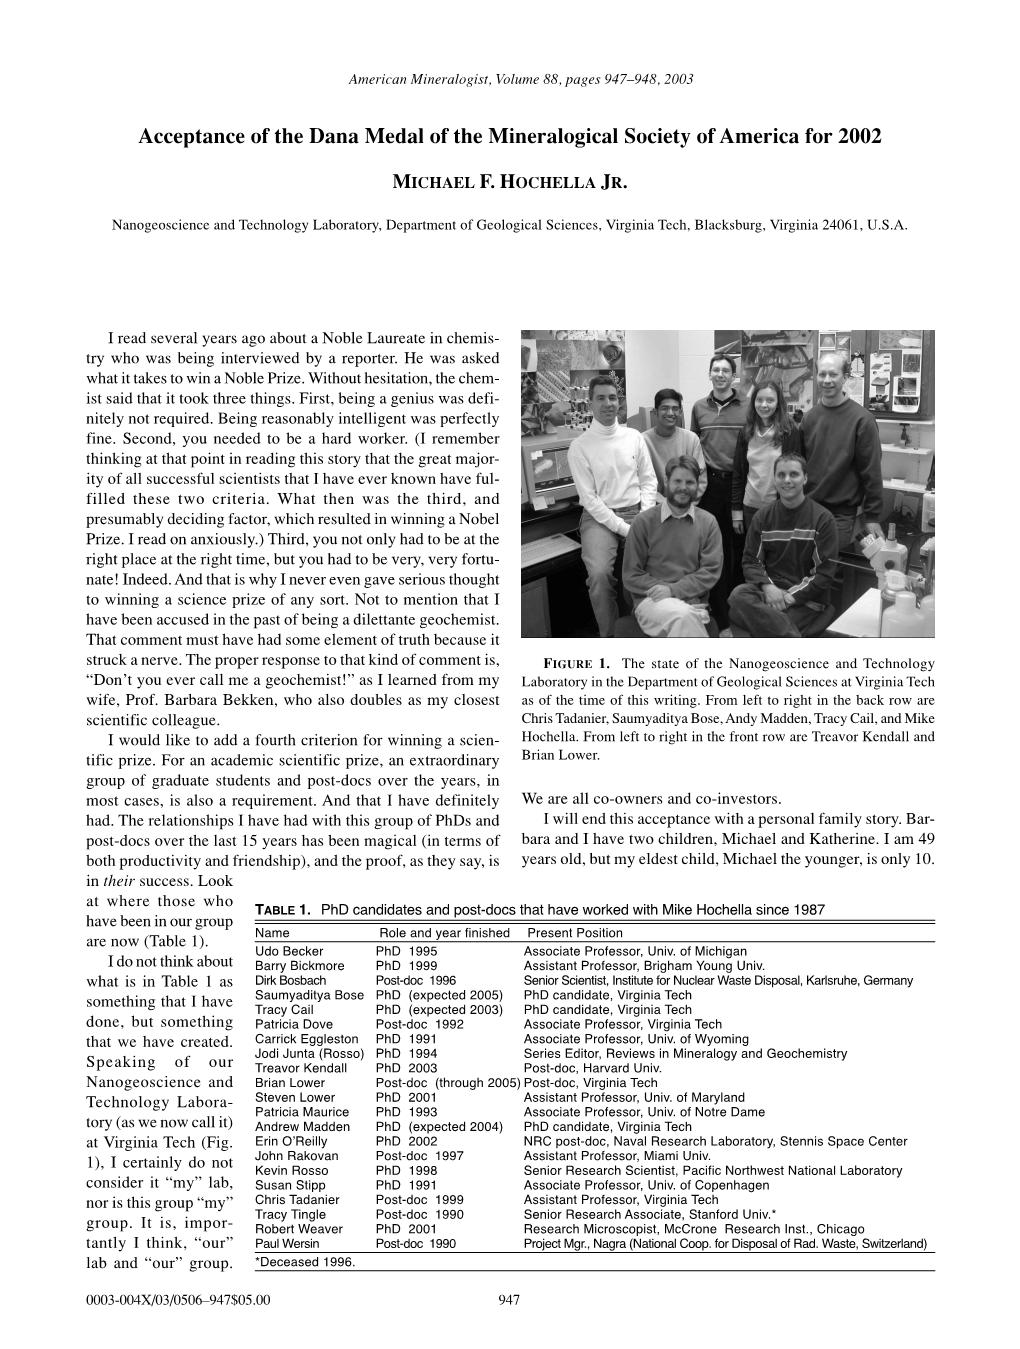 Acceptance of the Dana Medal of the Mineralogical Society of America for 2002